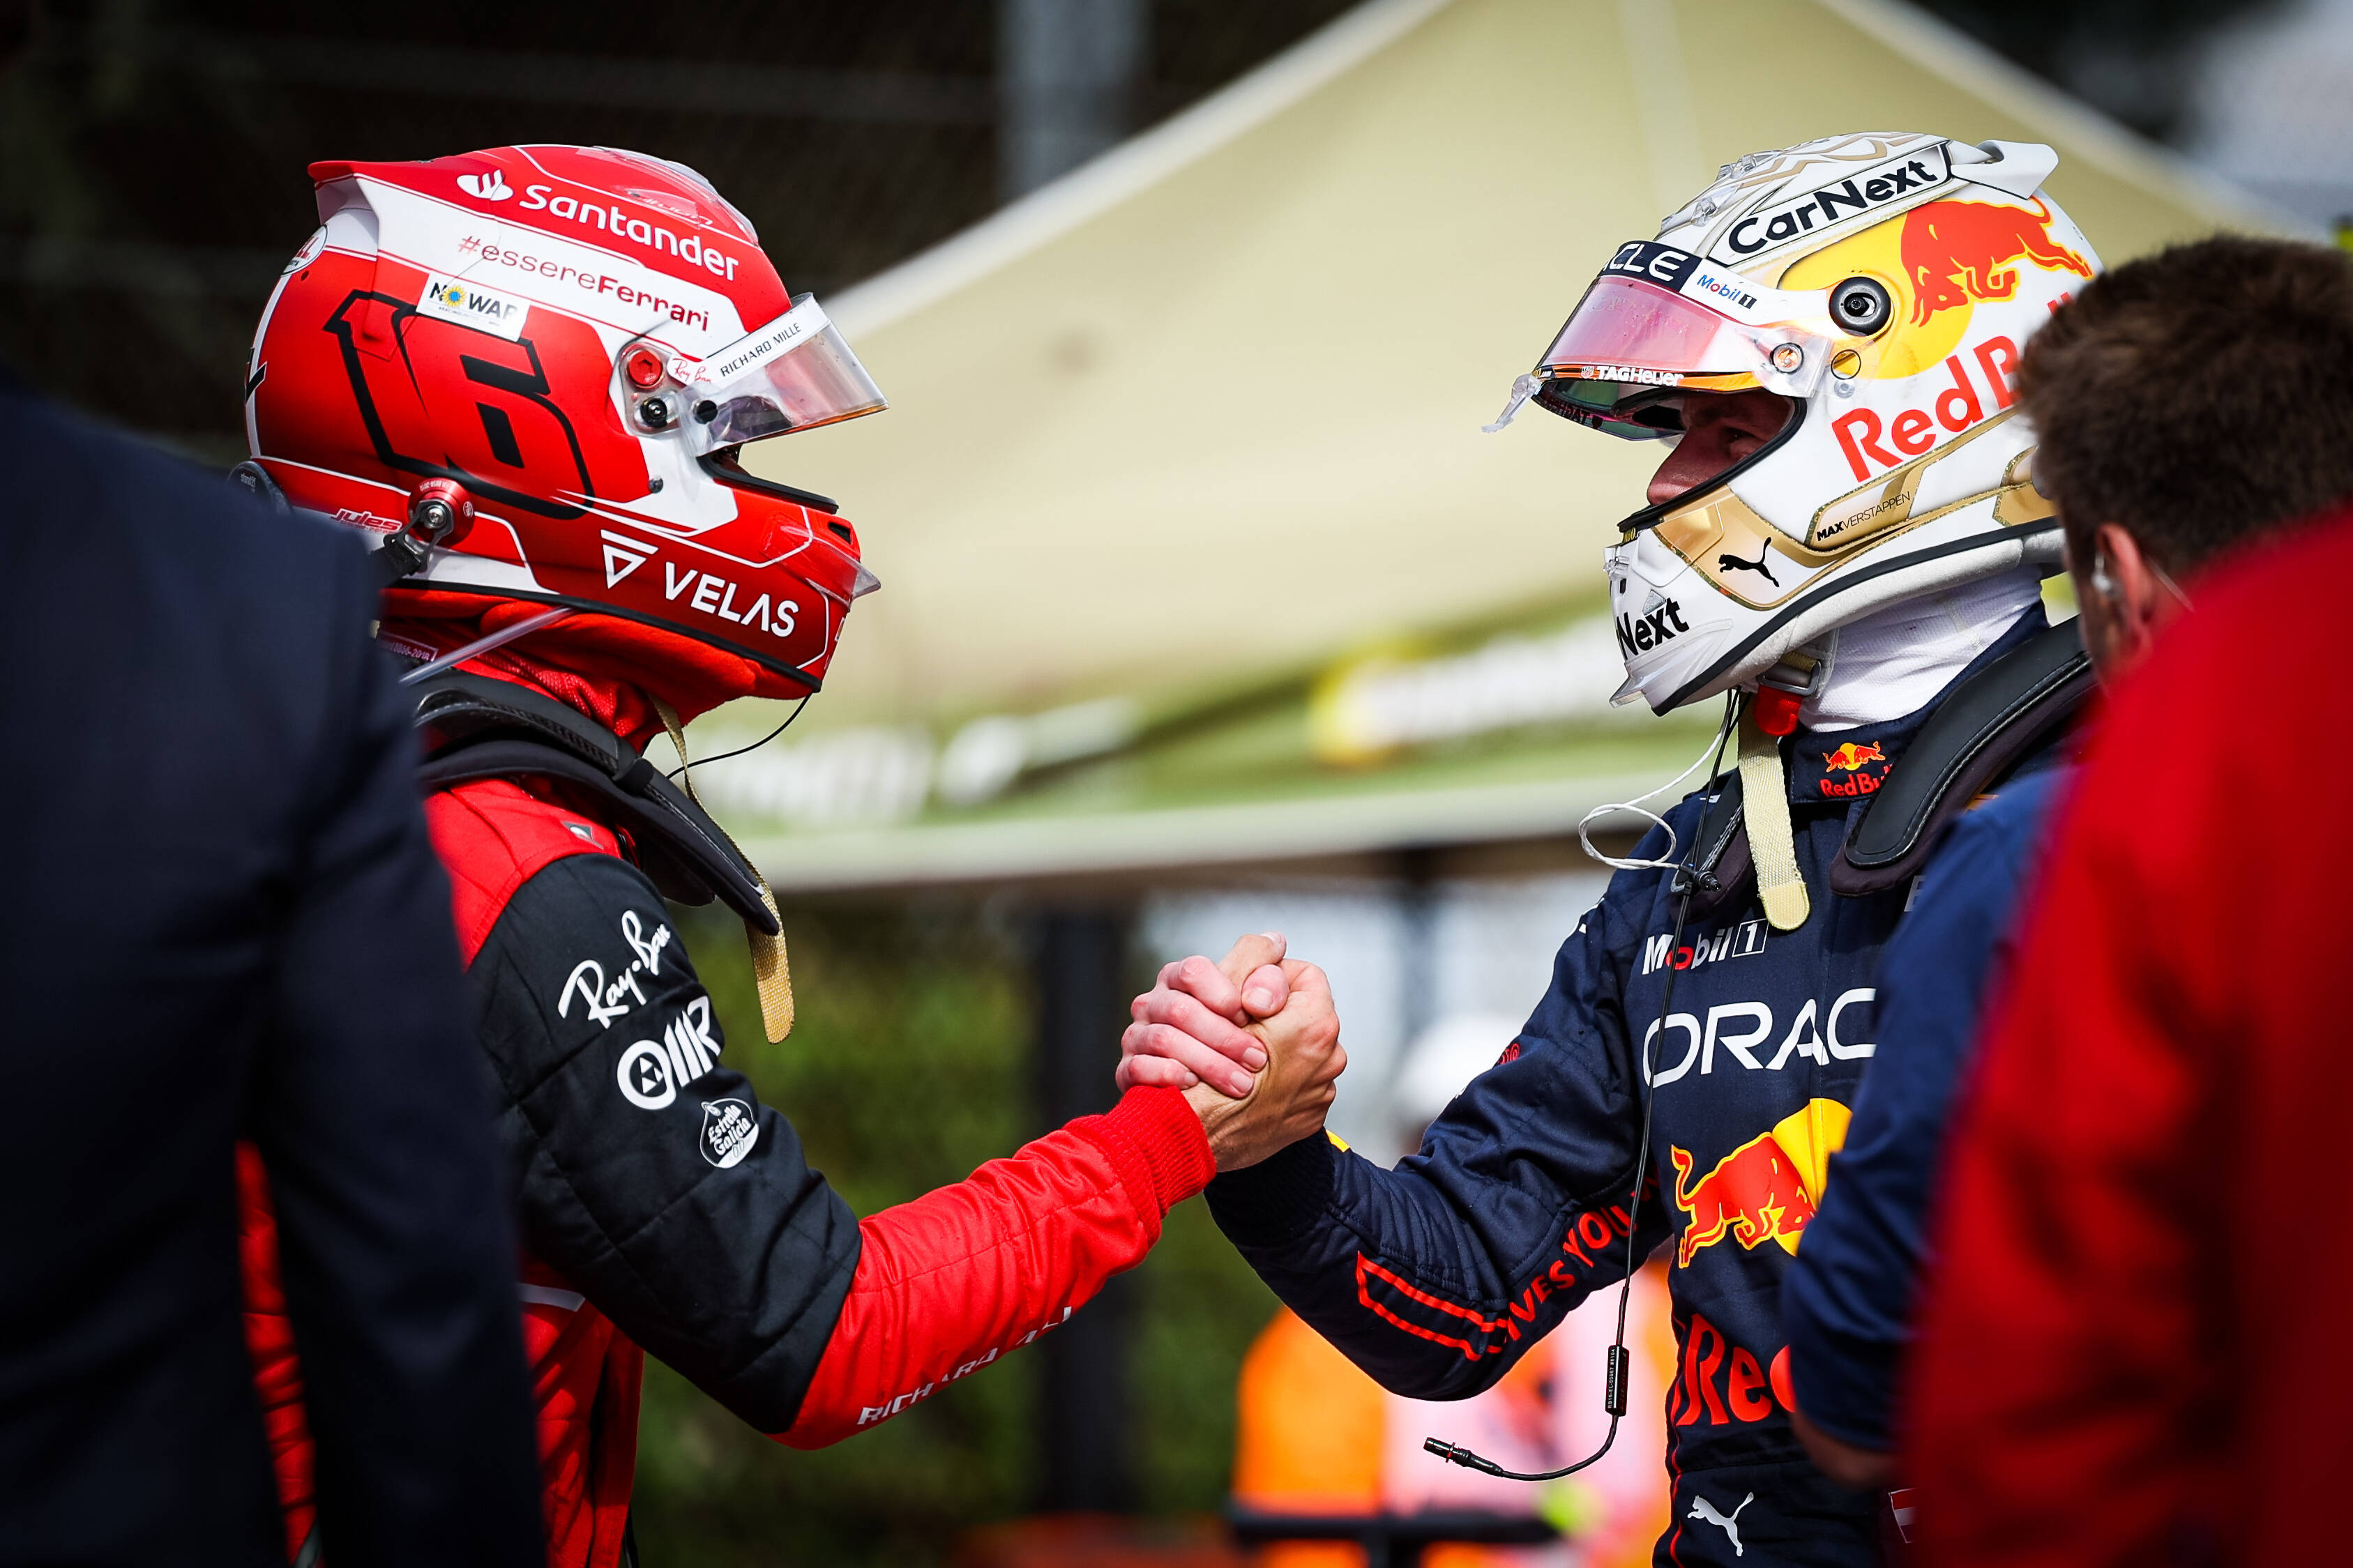 Charles Leclerc (L) and Max verstappen came together to congratulate each other after a thrilling race 